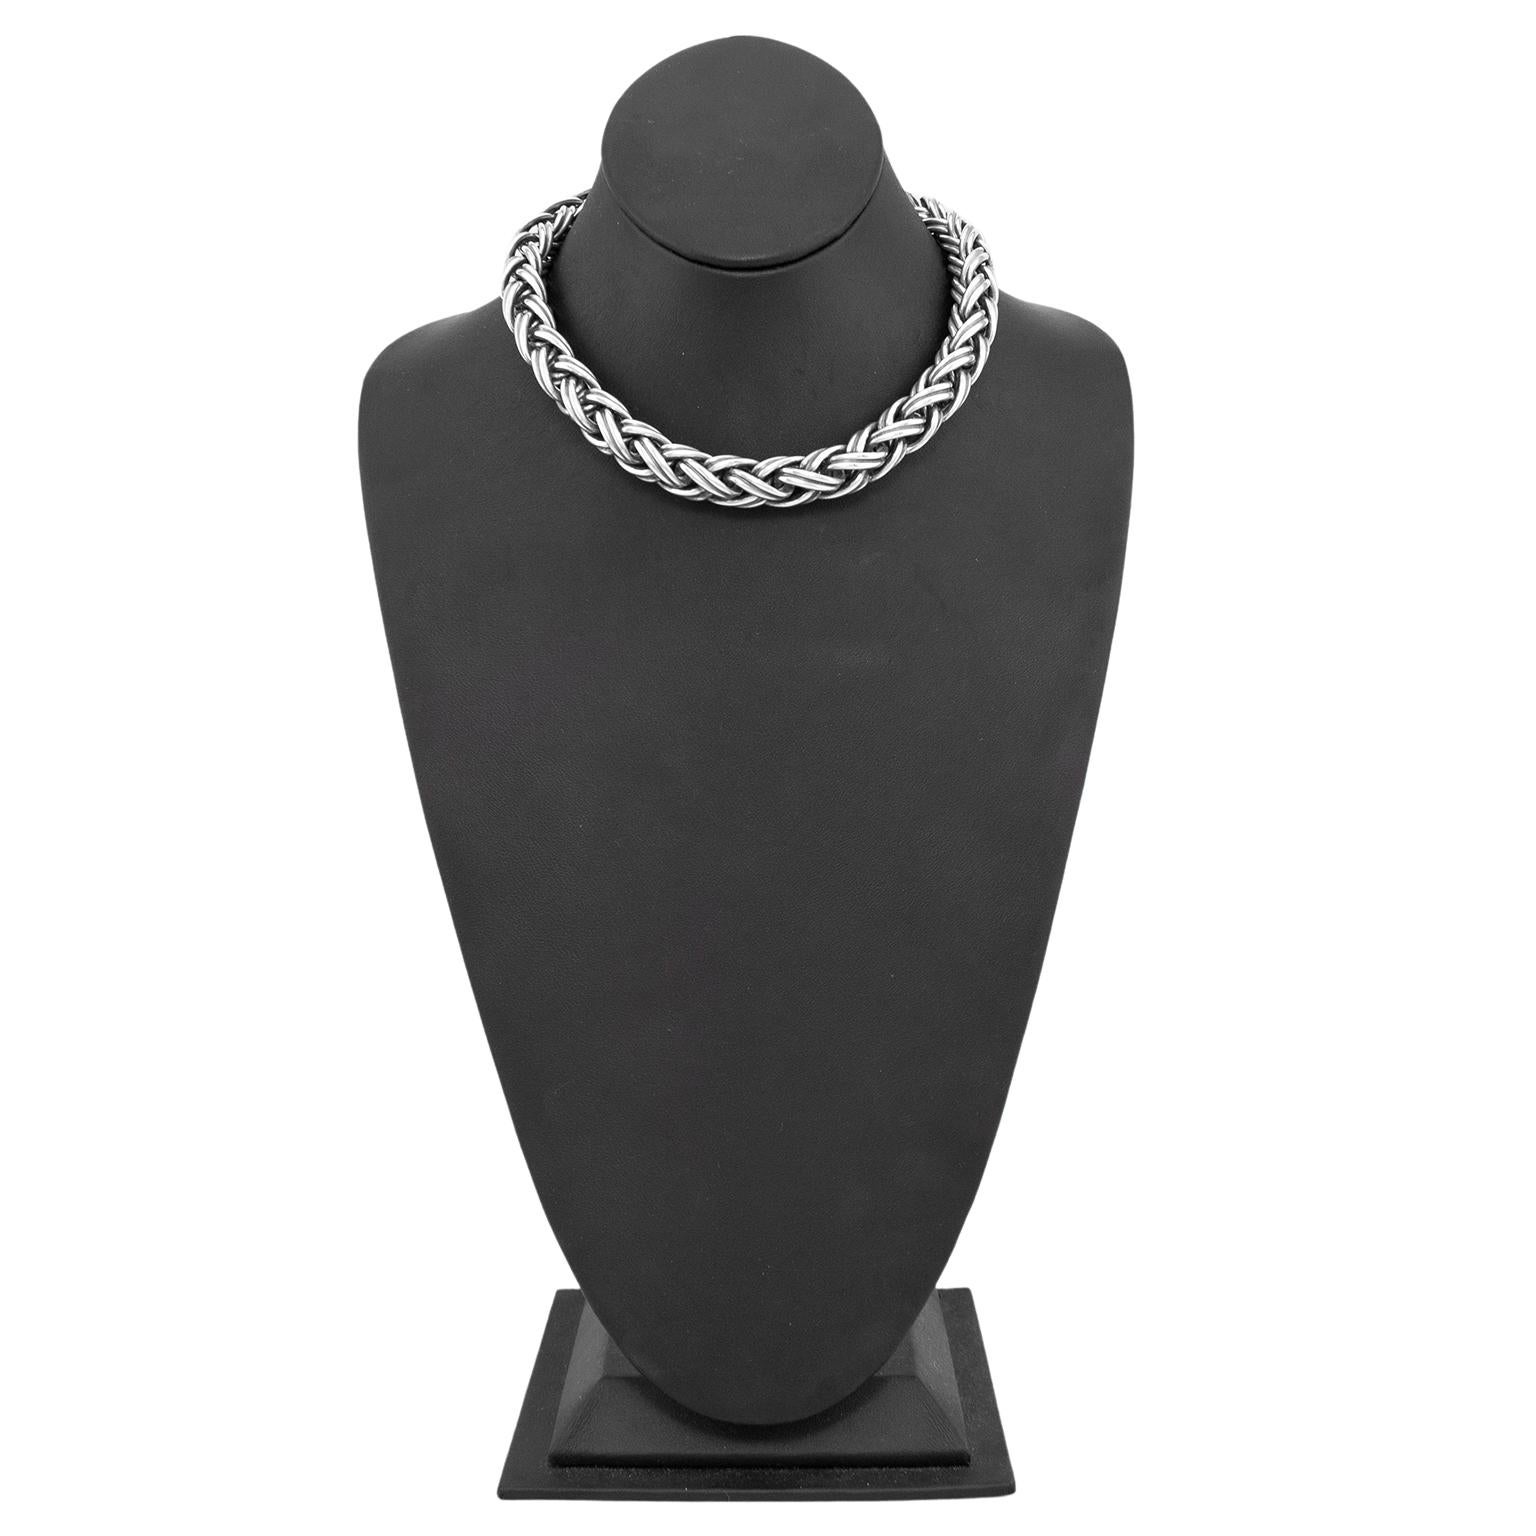 Stunning Tiffany & Co. sterling silver necklace dating from the 1980's. Looped rope chain linked together to create a braid like effect in a thick square shape. Measures 16